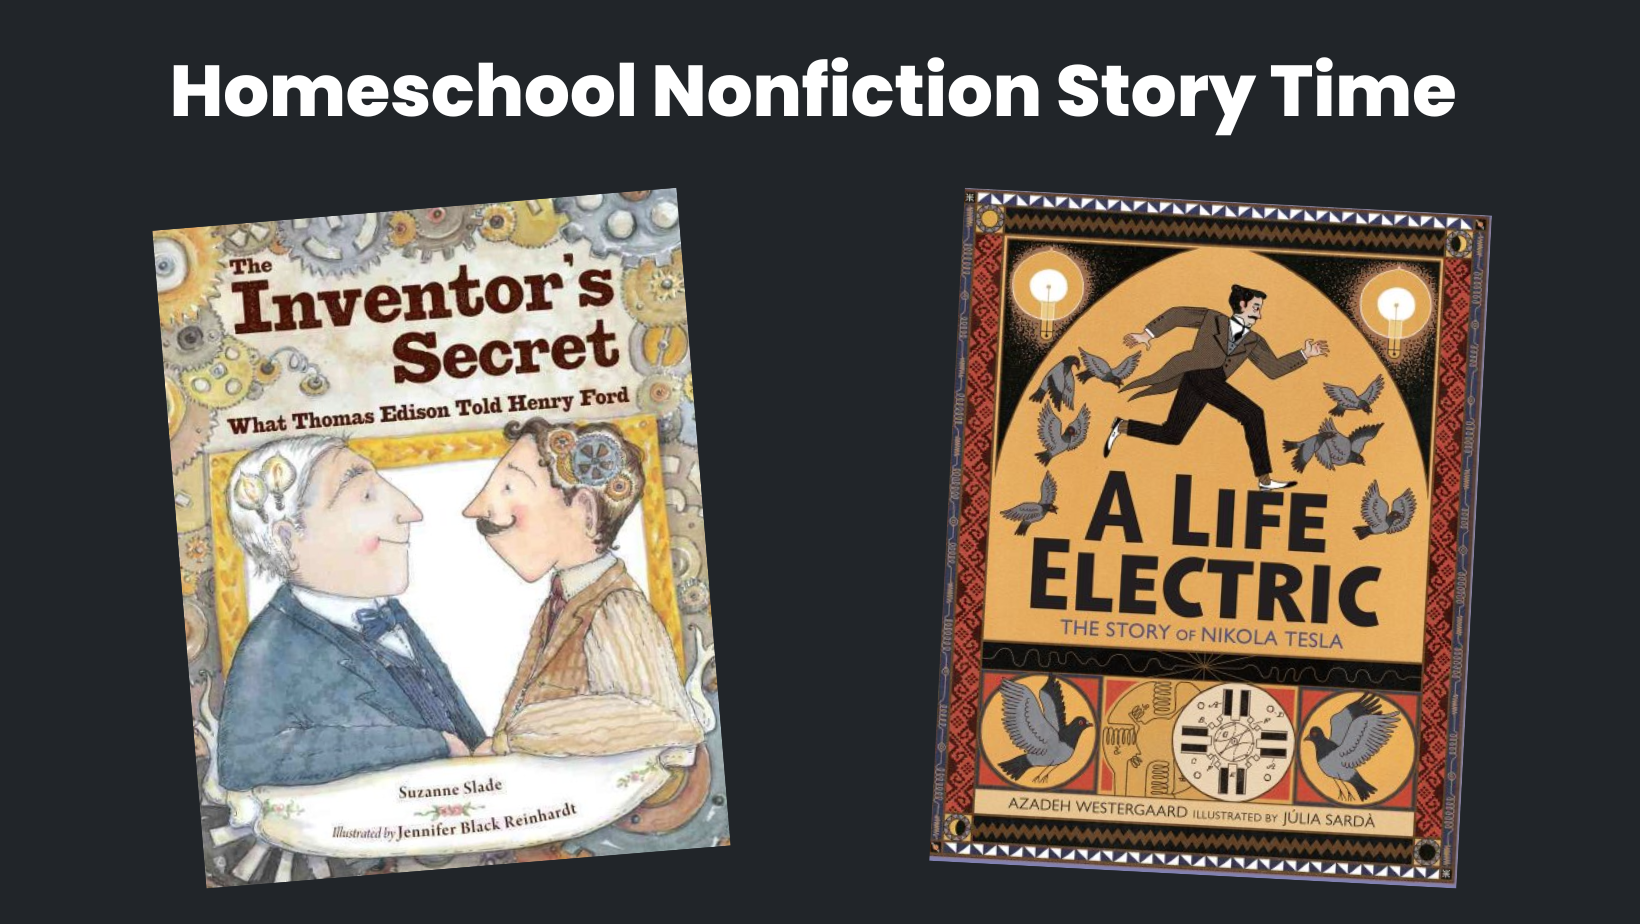 Homeschool Nonfiction Story Time with Book Covers 